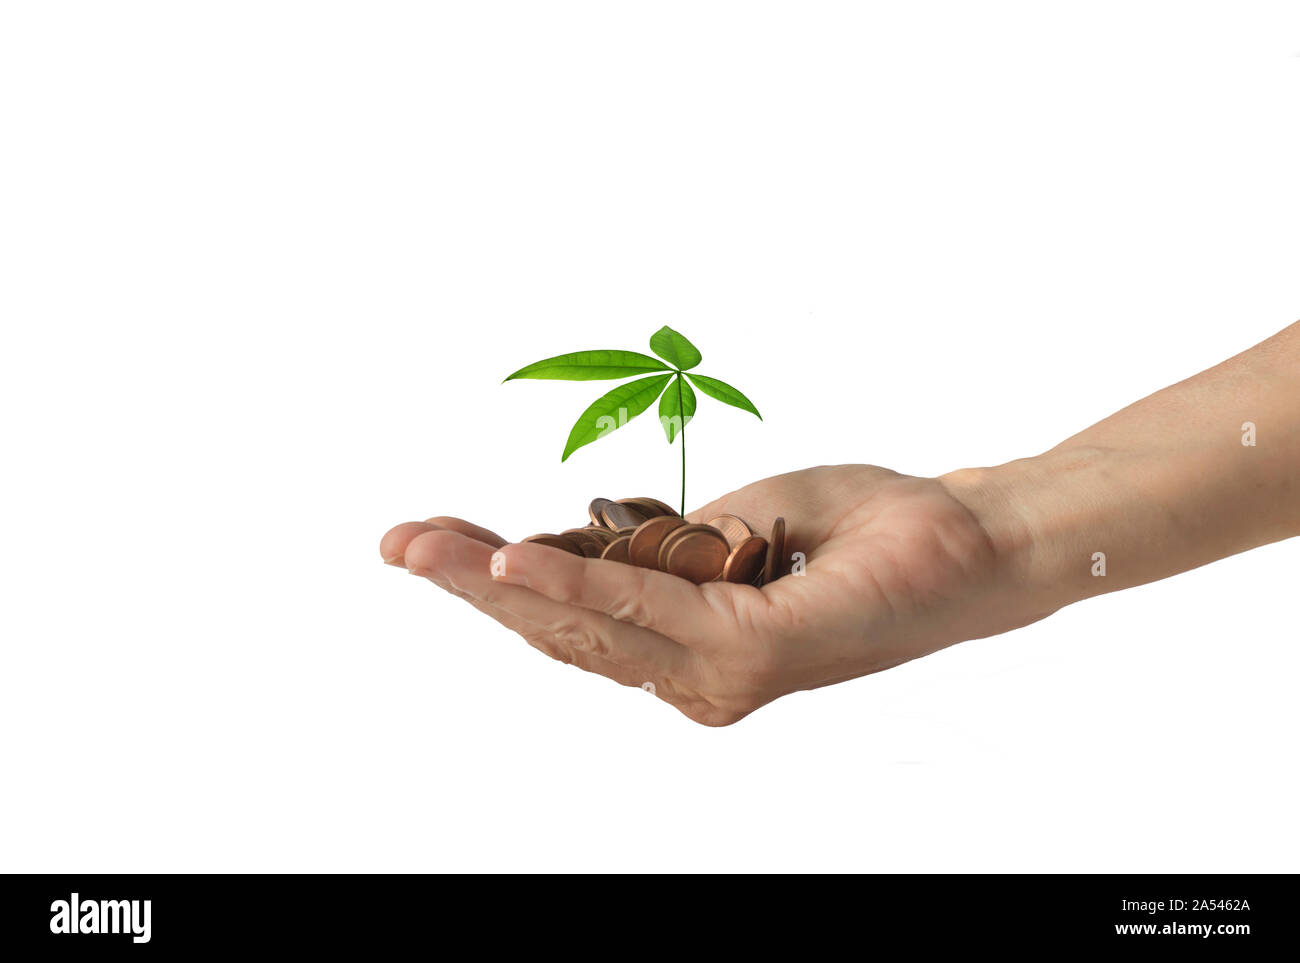 Human hand with heap of money and a small tree on it, isolated on a white background Stock Photo